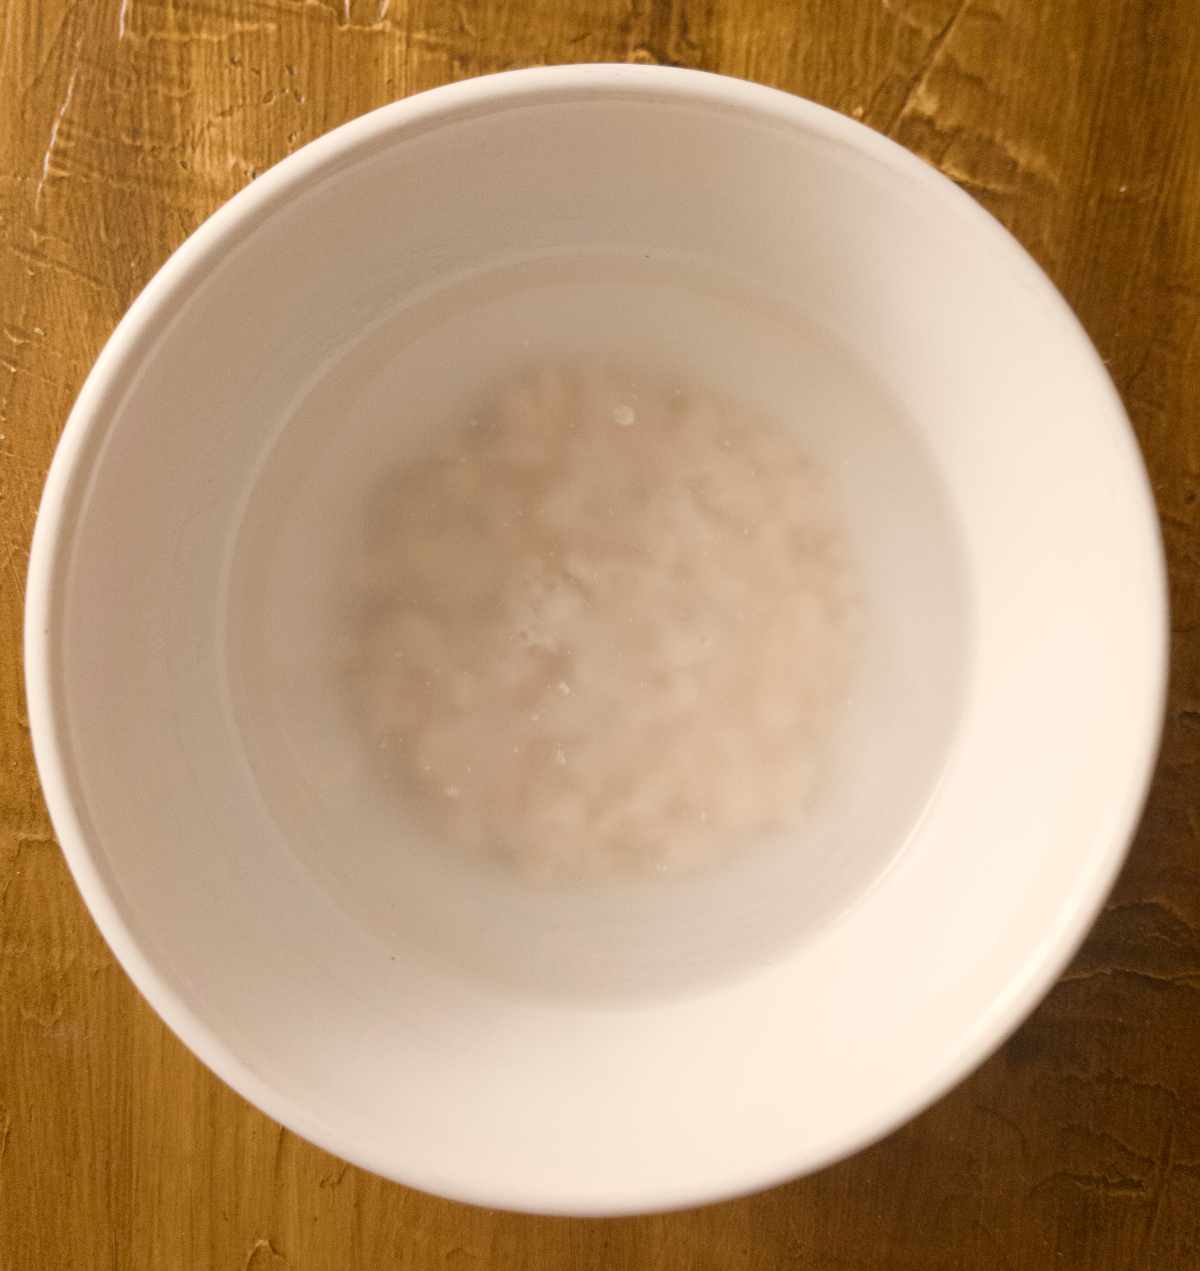 Yeast in water in a white bowl on a wooden surface.